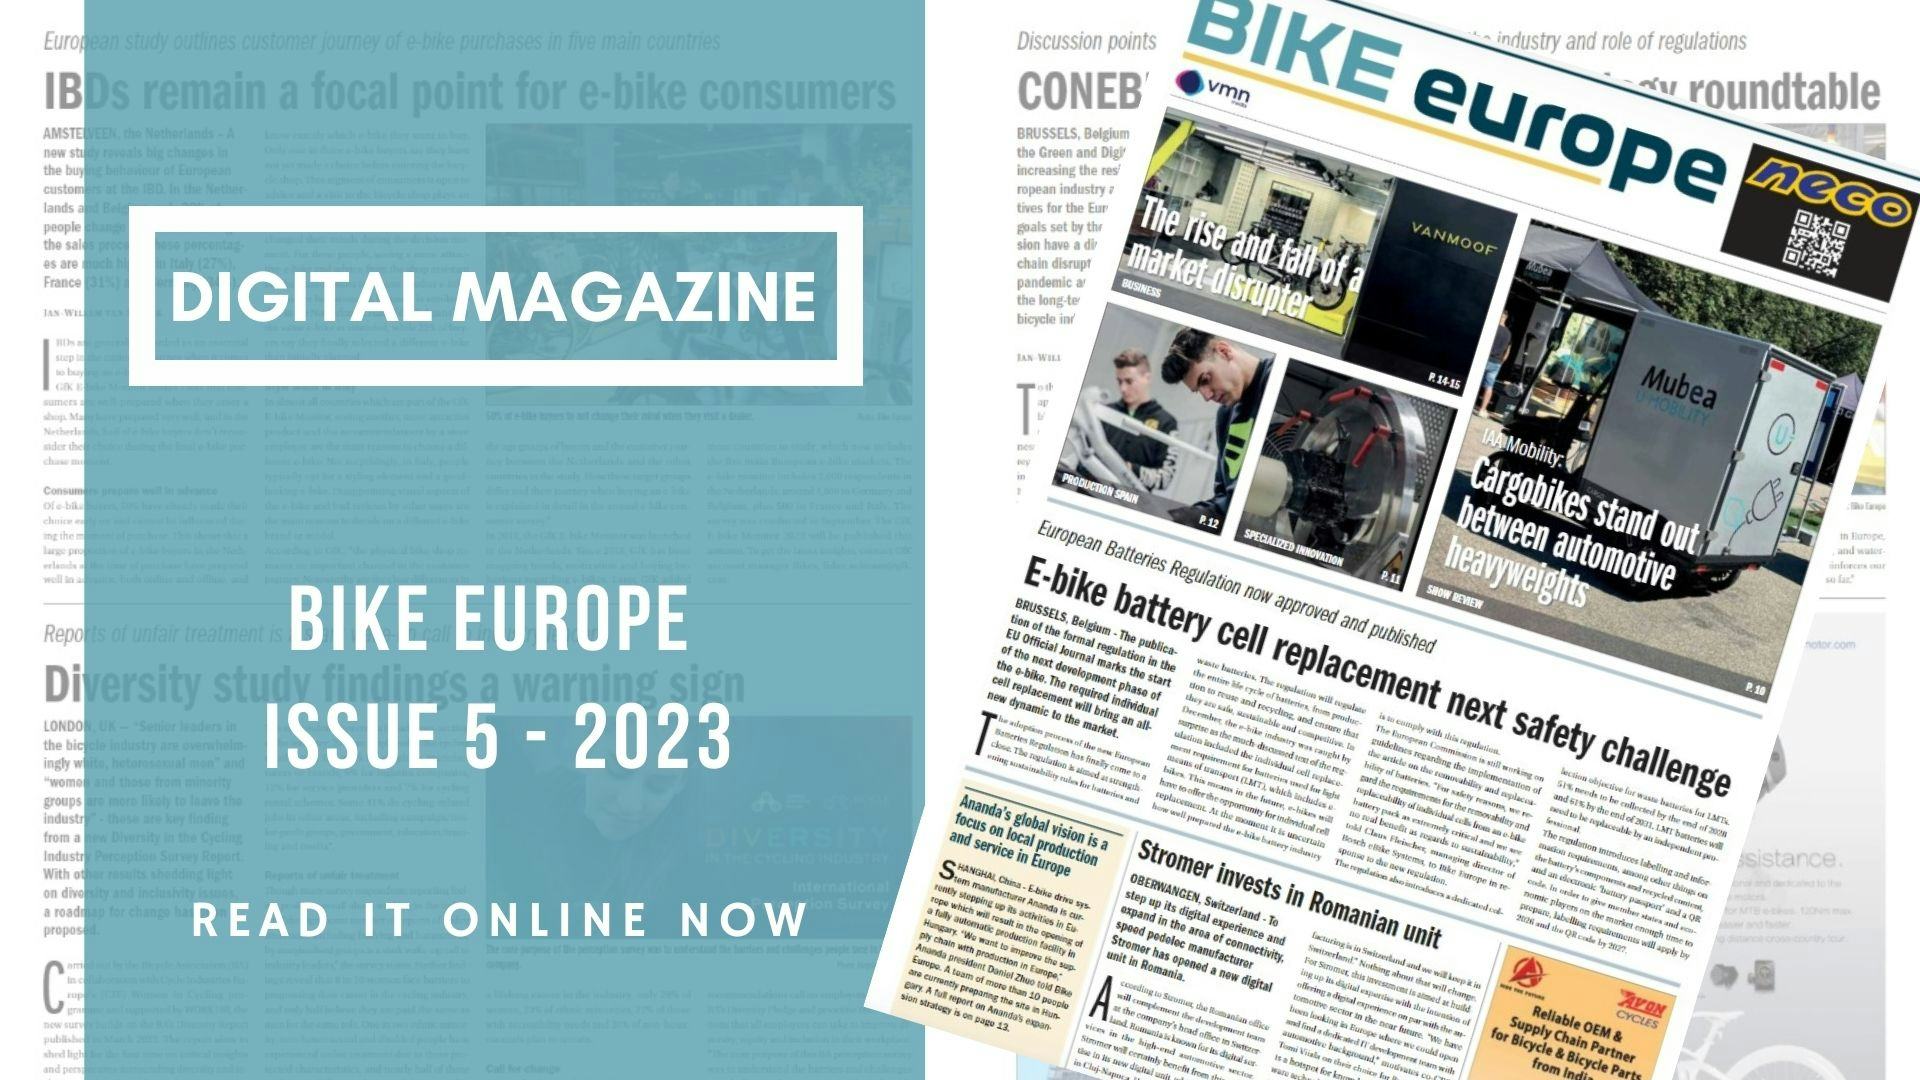 Bike Europe issue 5/2023 available online now